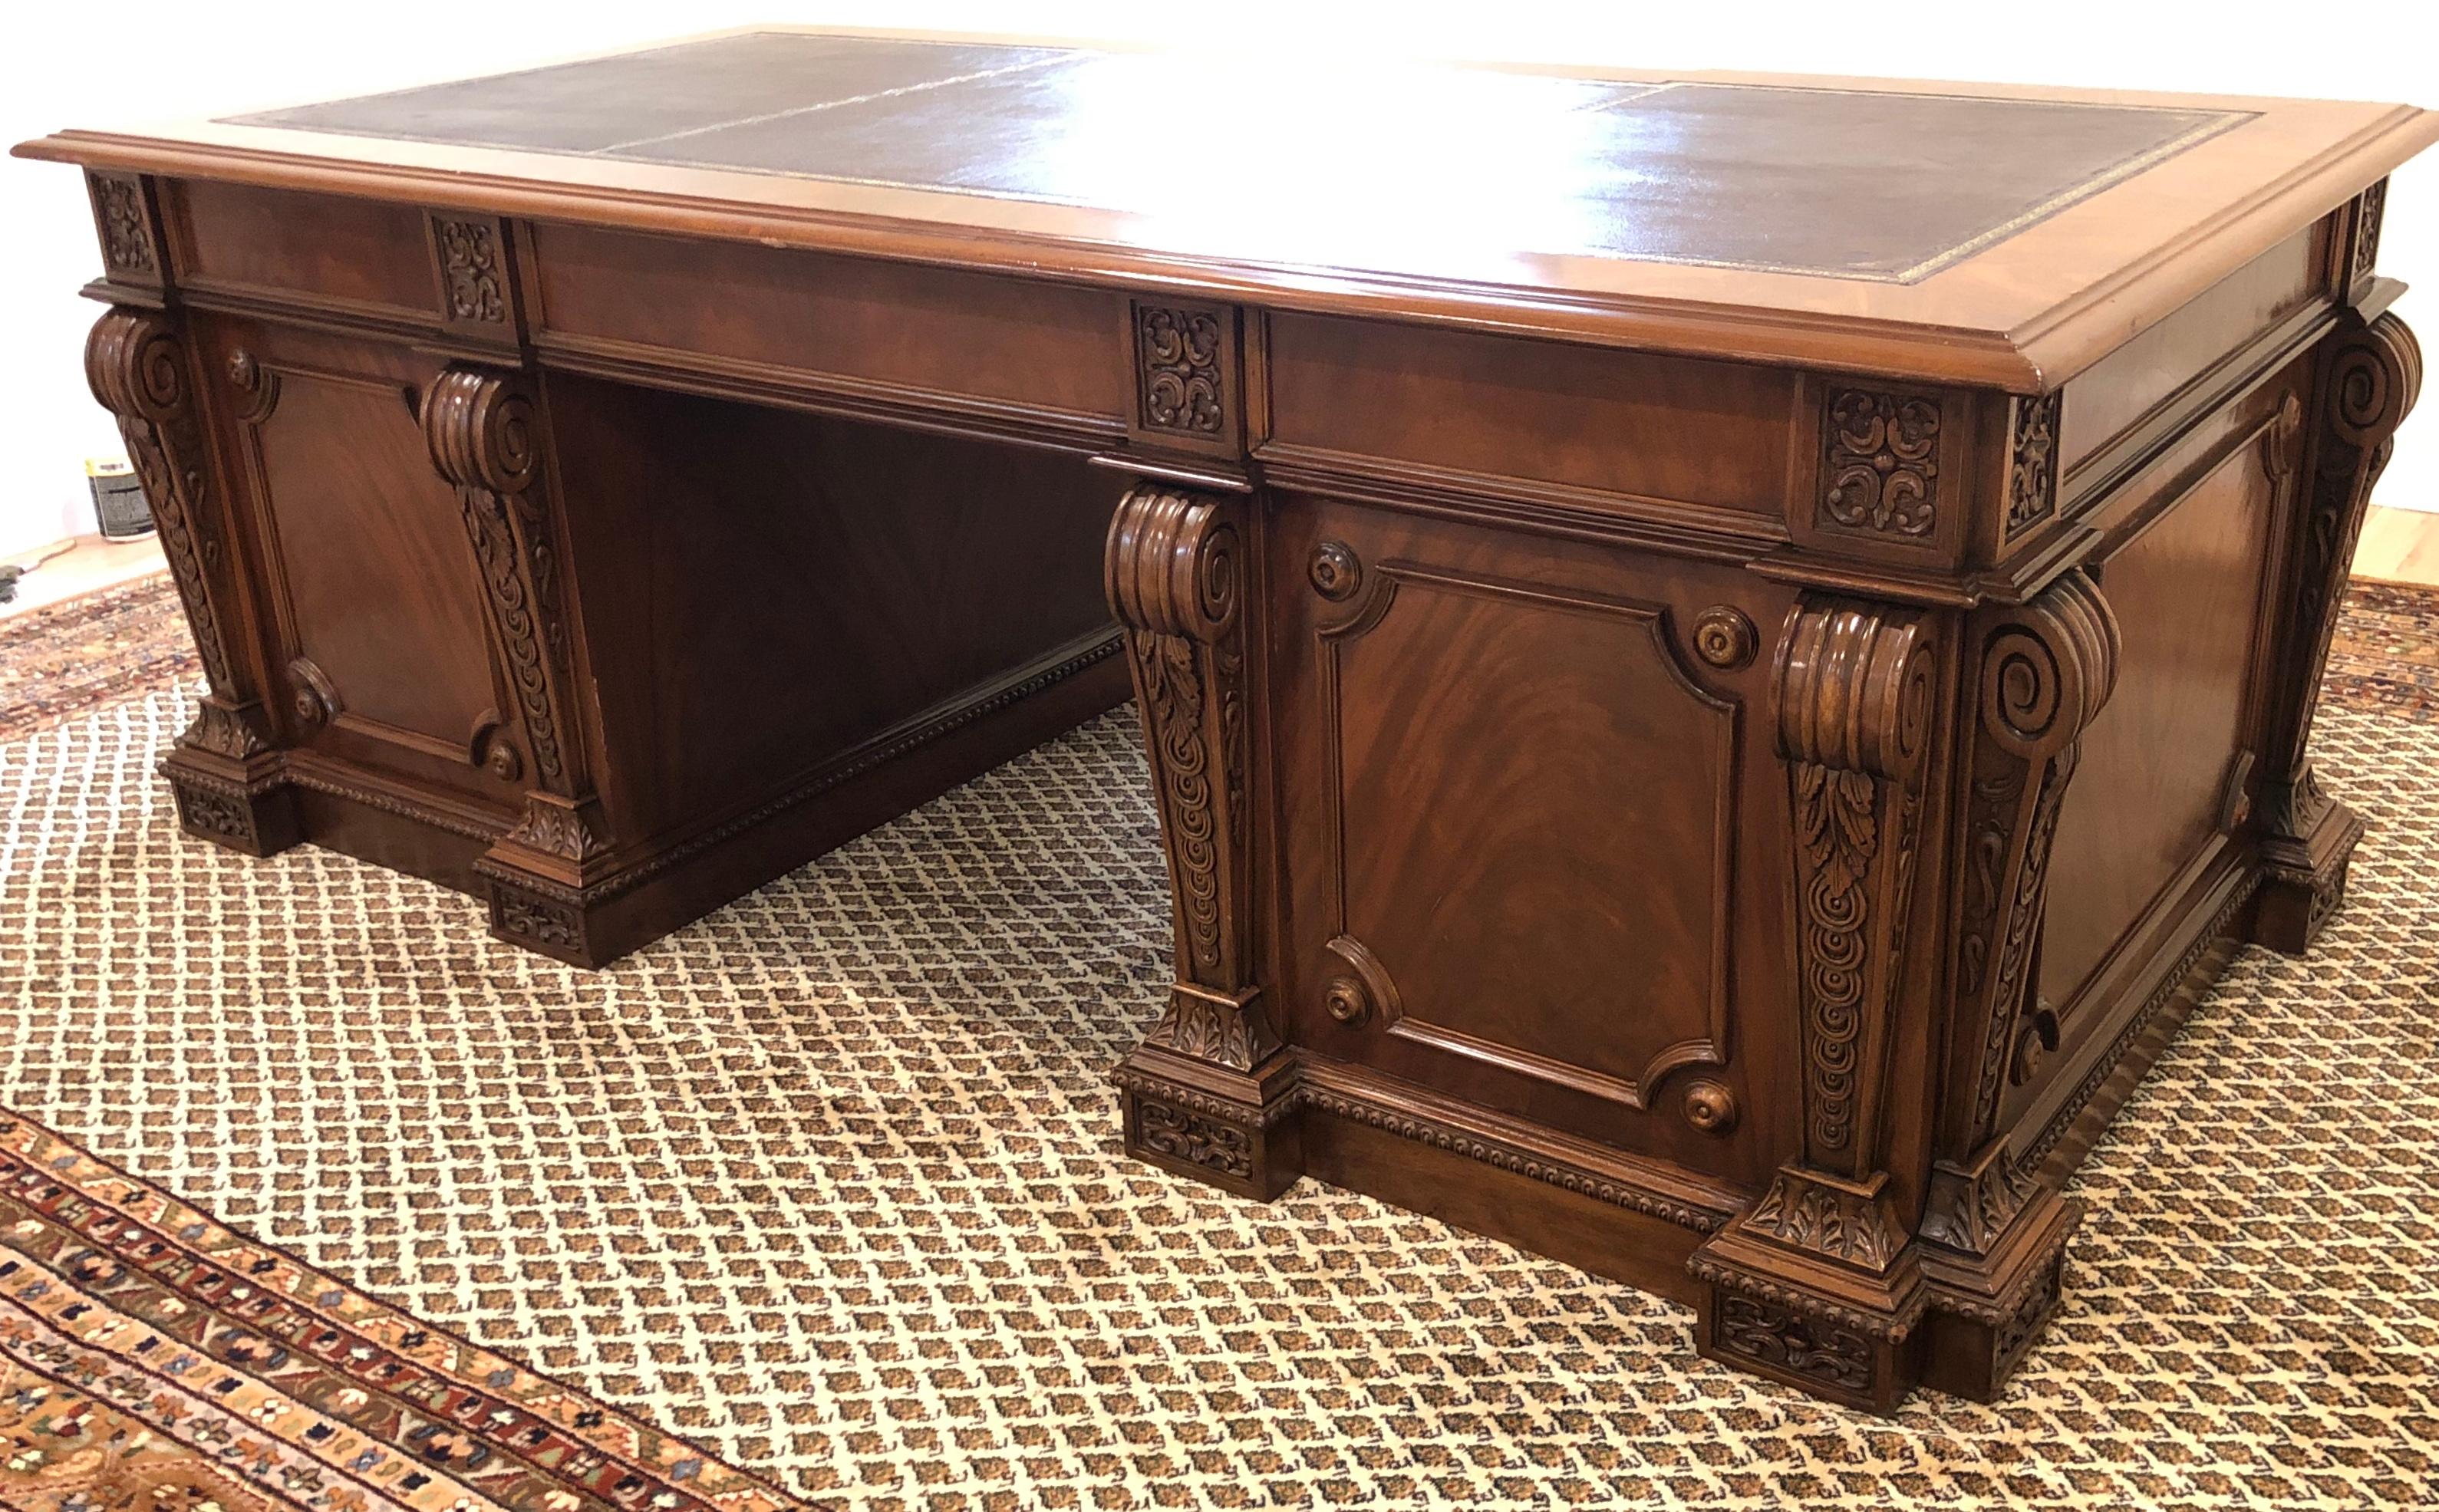 Large hand carved Regency style  mahogany twin pedestal desk with gold tooled burgundy leather top. Fine quality mahogany executive size double pedestal desk. Burgundy gold tooled leather top in three panels.